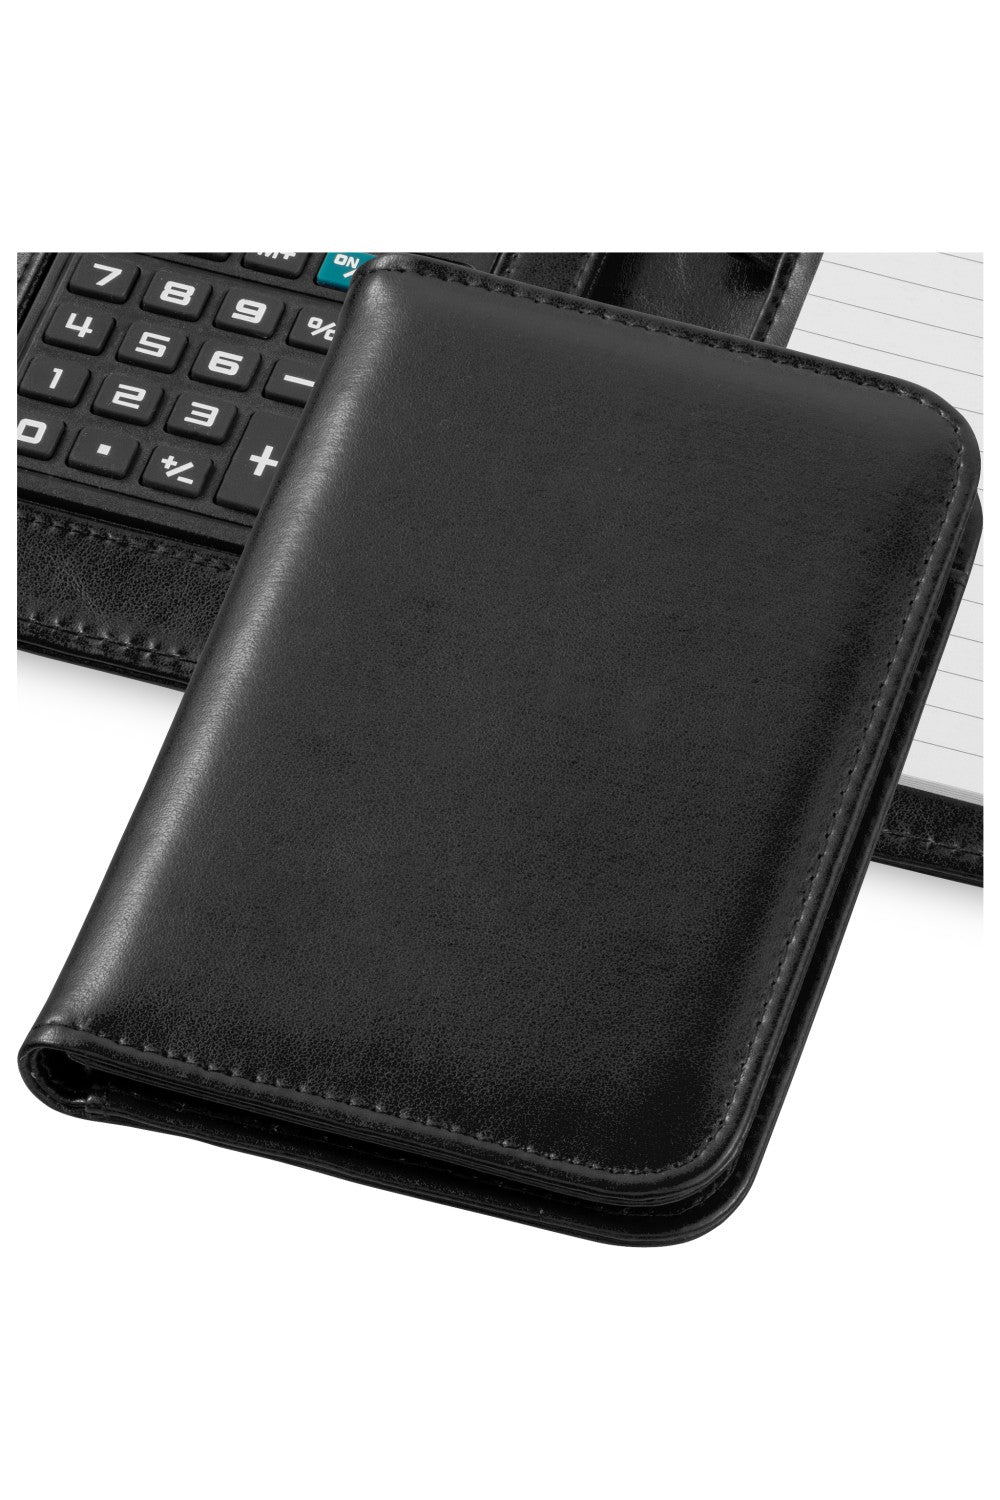 Bullet Smarti Calculator Notebook (Pack of 2) (Solid Black) (6.6 x 4.4 x 0.9 inches)